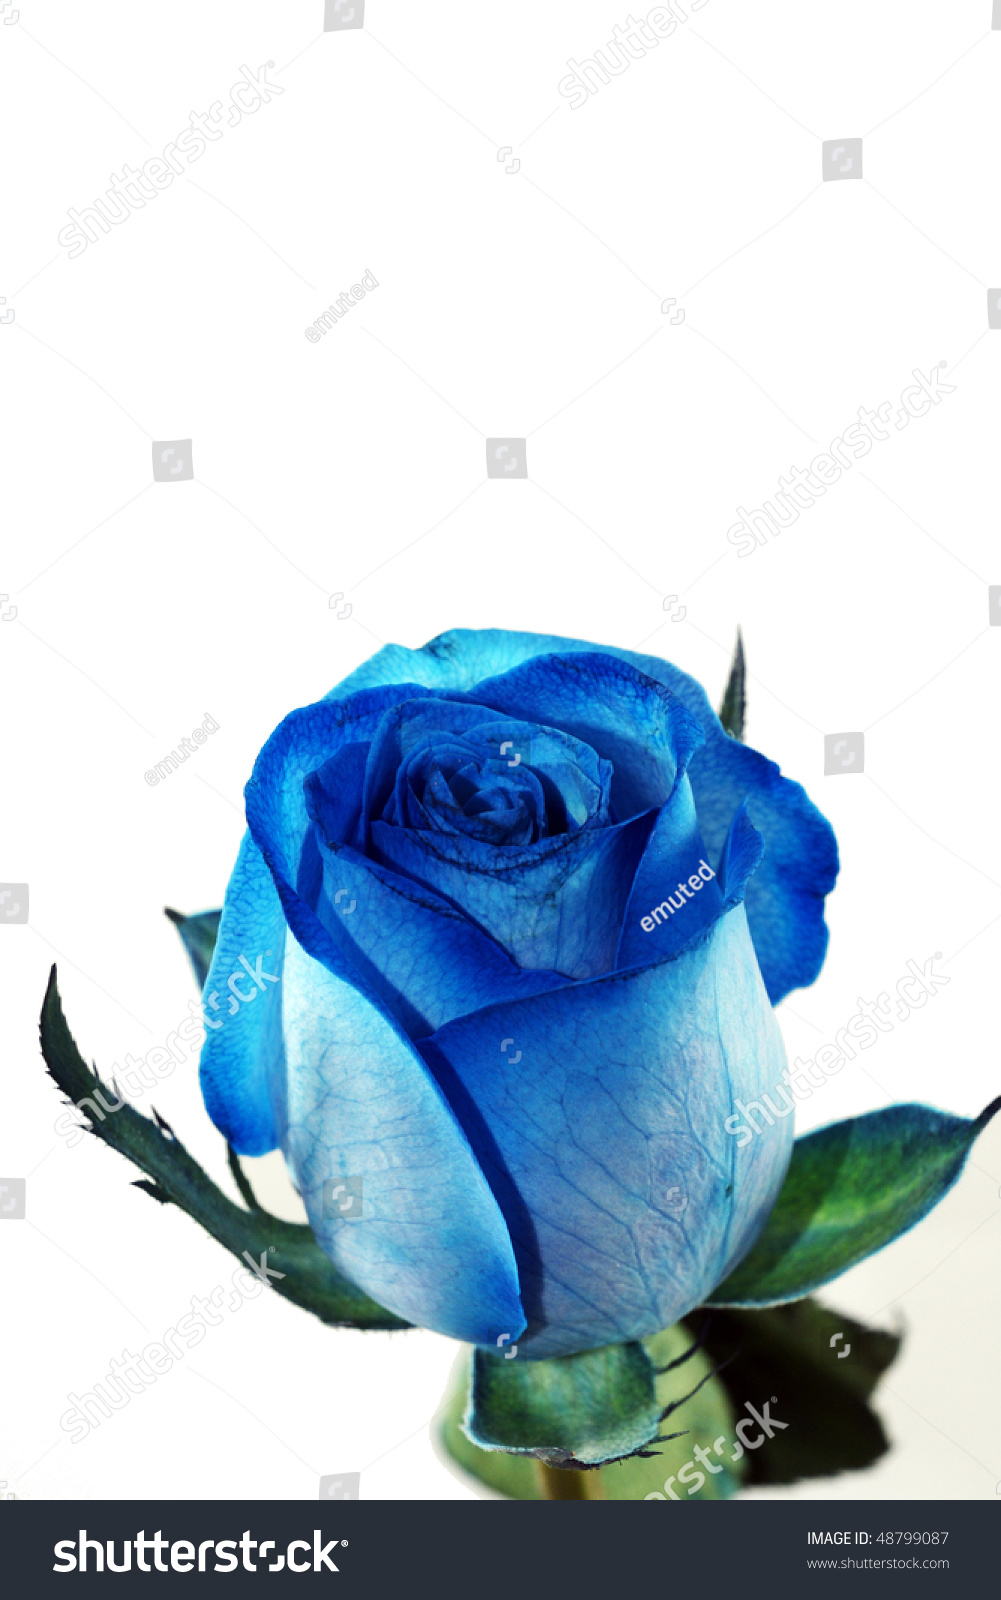 Close Up Of Blue Rose Stock Photo 48799087 : Shutterstock